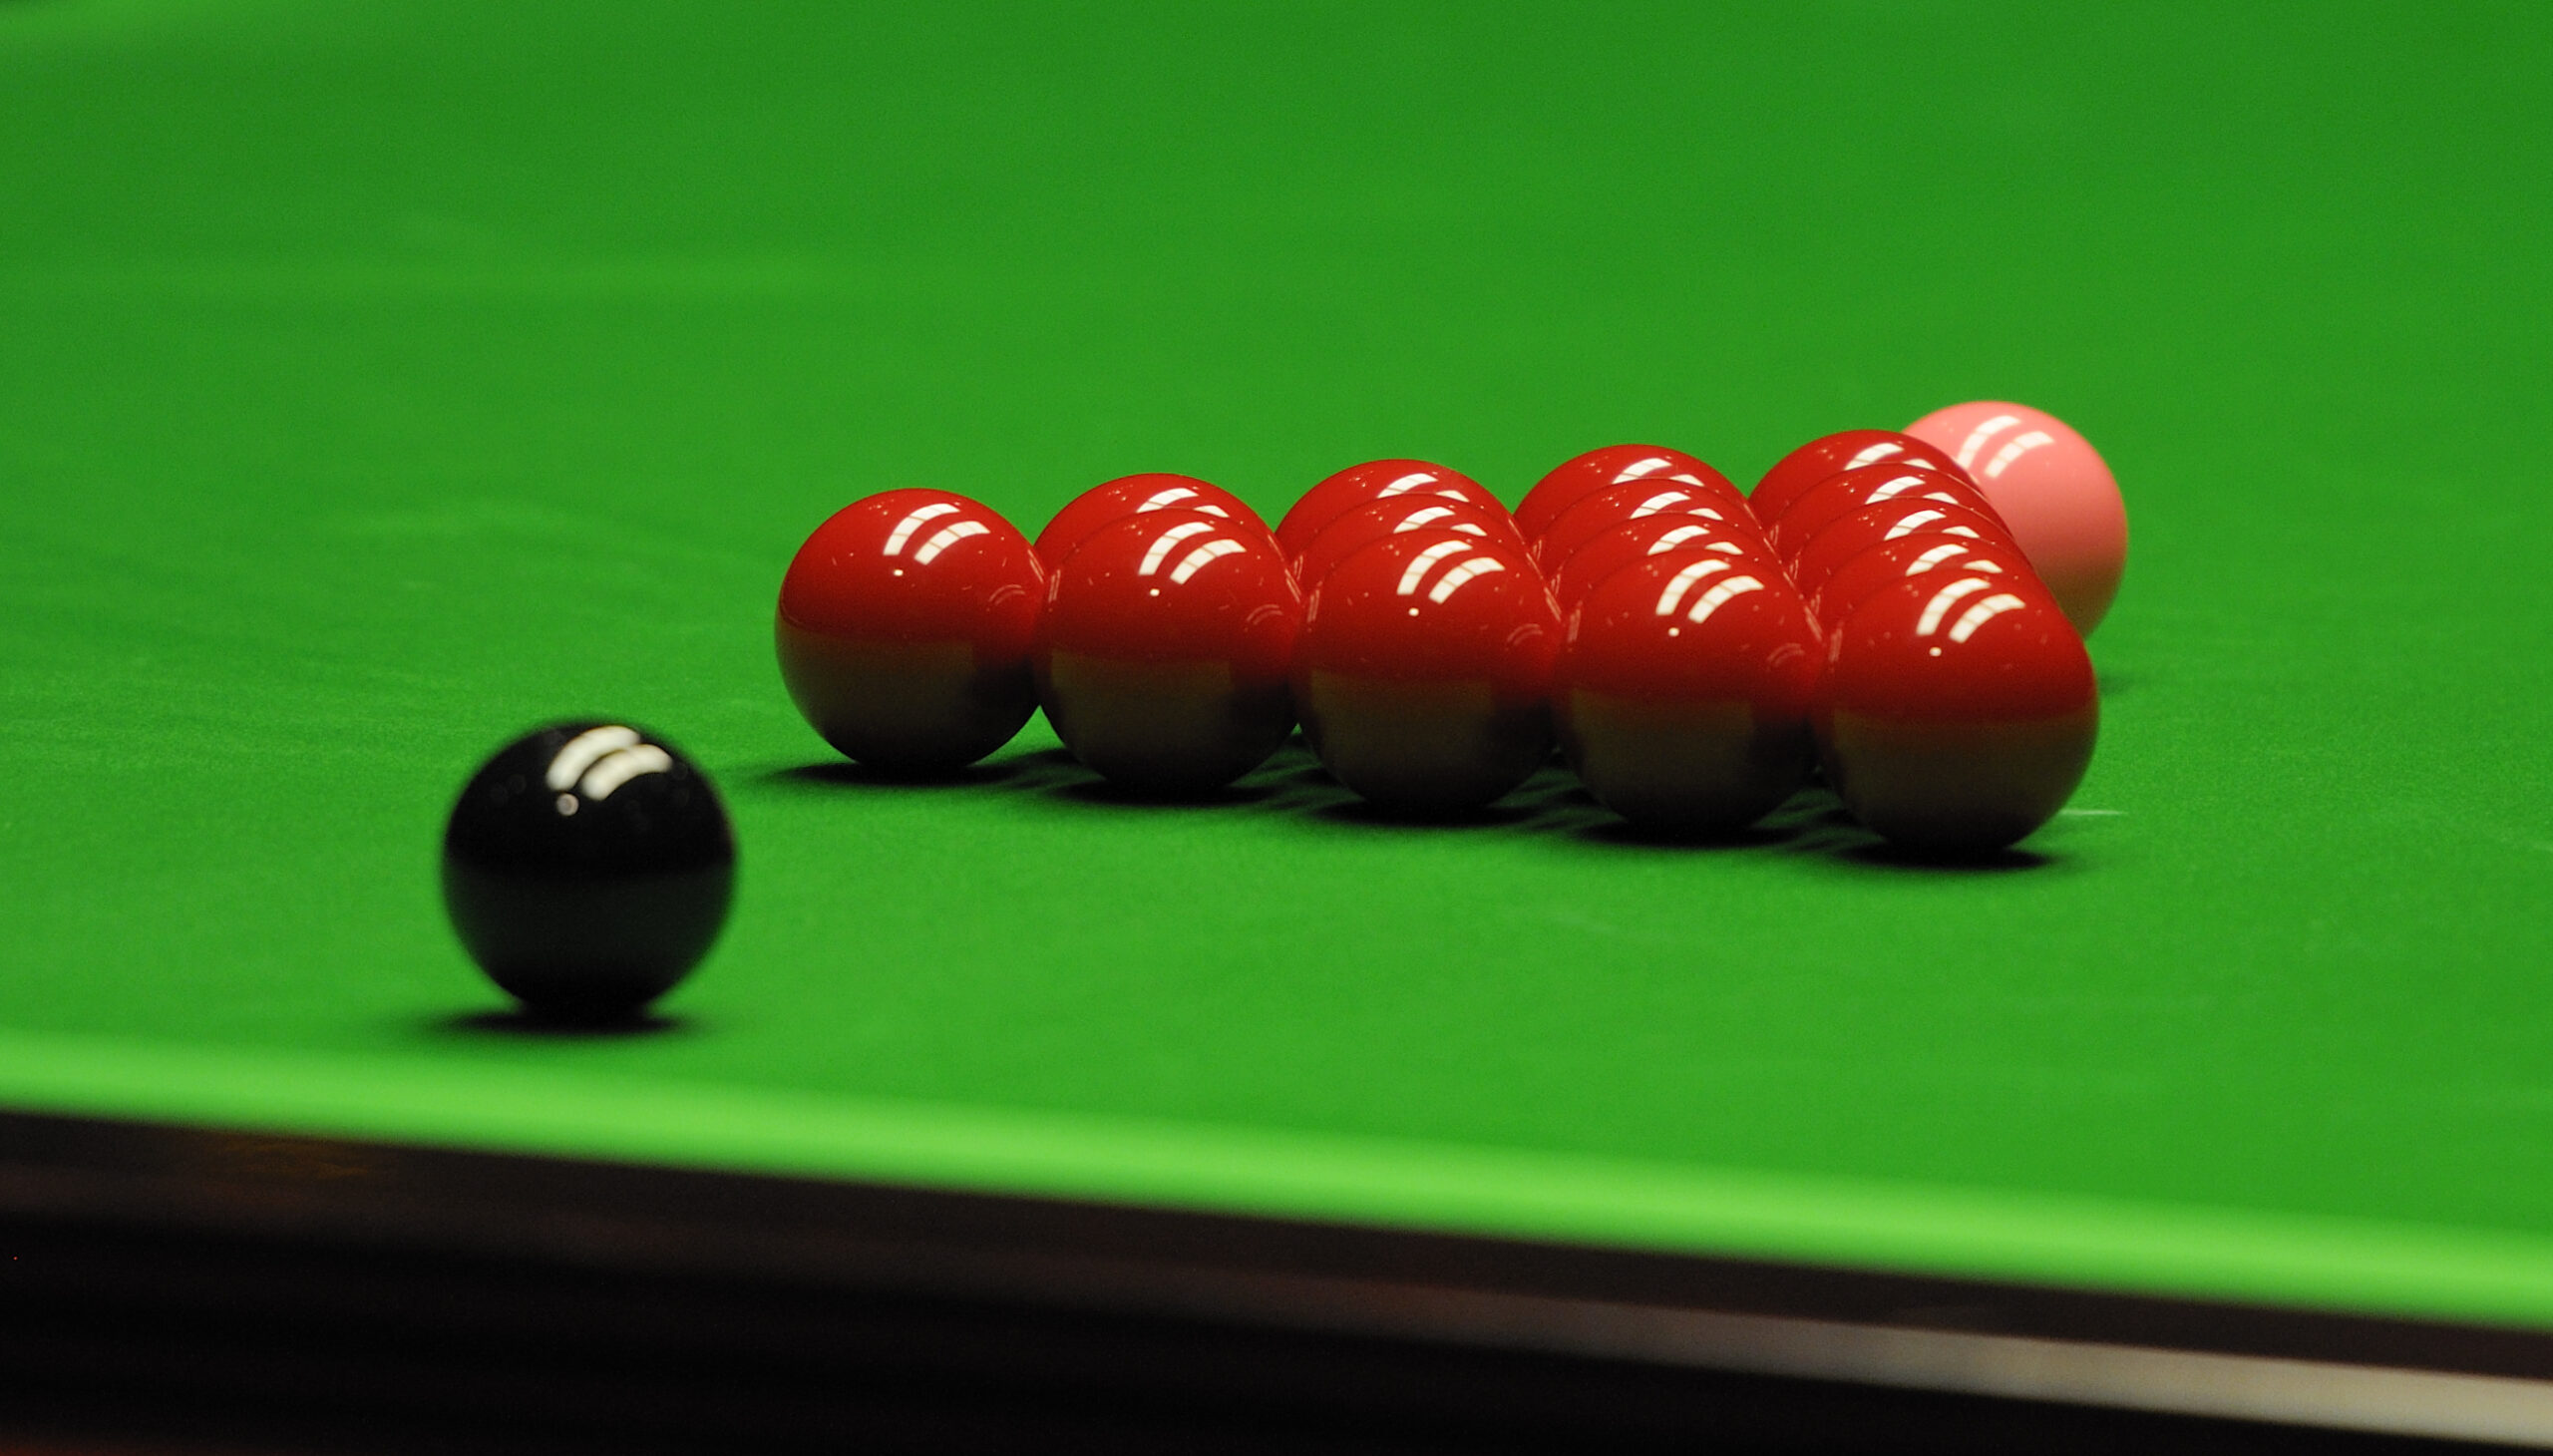 British Open 2023 snooker final preview